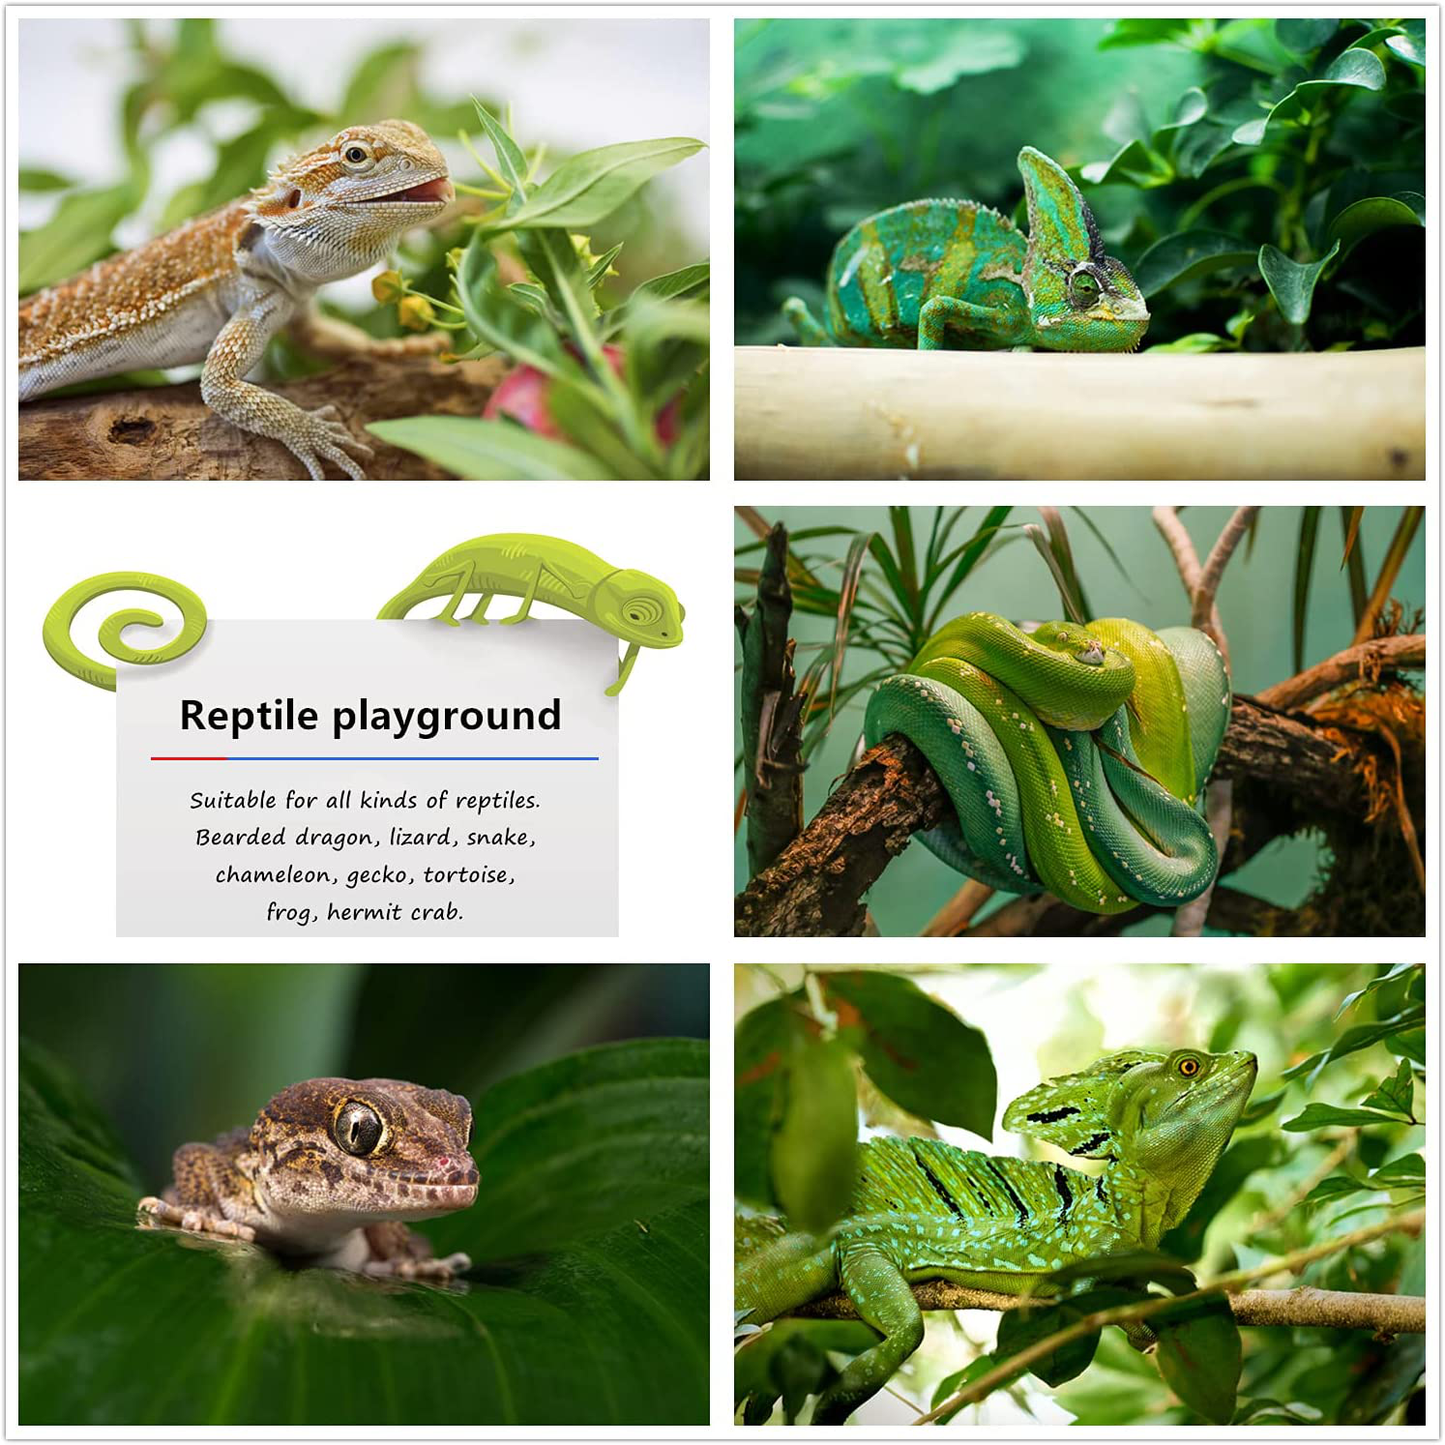 TTEIOPI Reptile Plants, Bendable Hanging Jungle Vines & Artificial Leaves Terrarium Tank Fake Plants Habitat Decorations with Suction Cup for Bearded Dragon Hermit Crab Lizard Snake Geckos Chameleon.